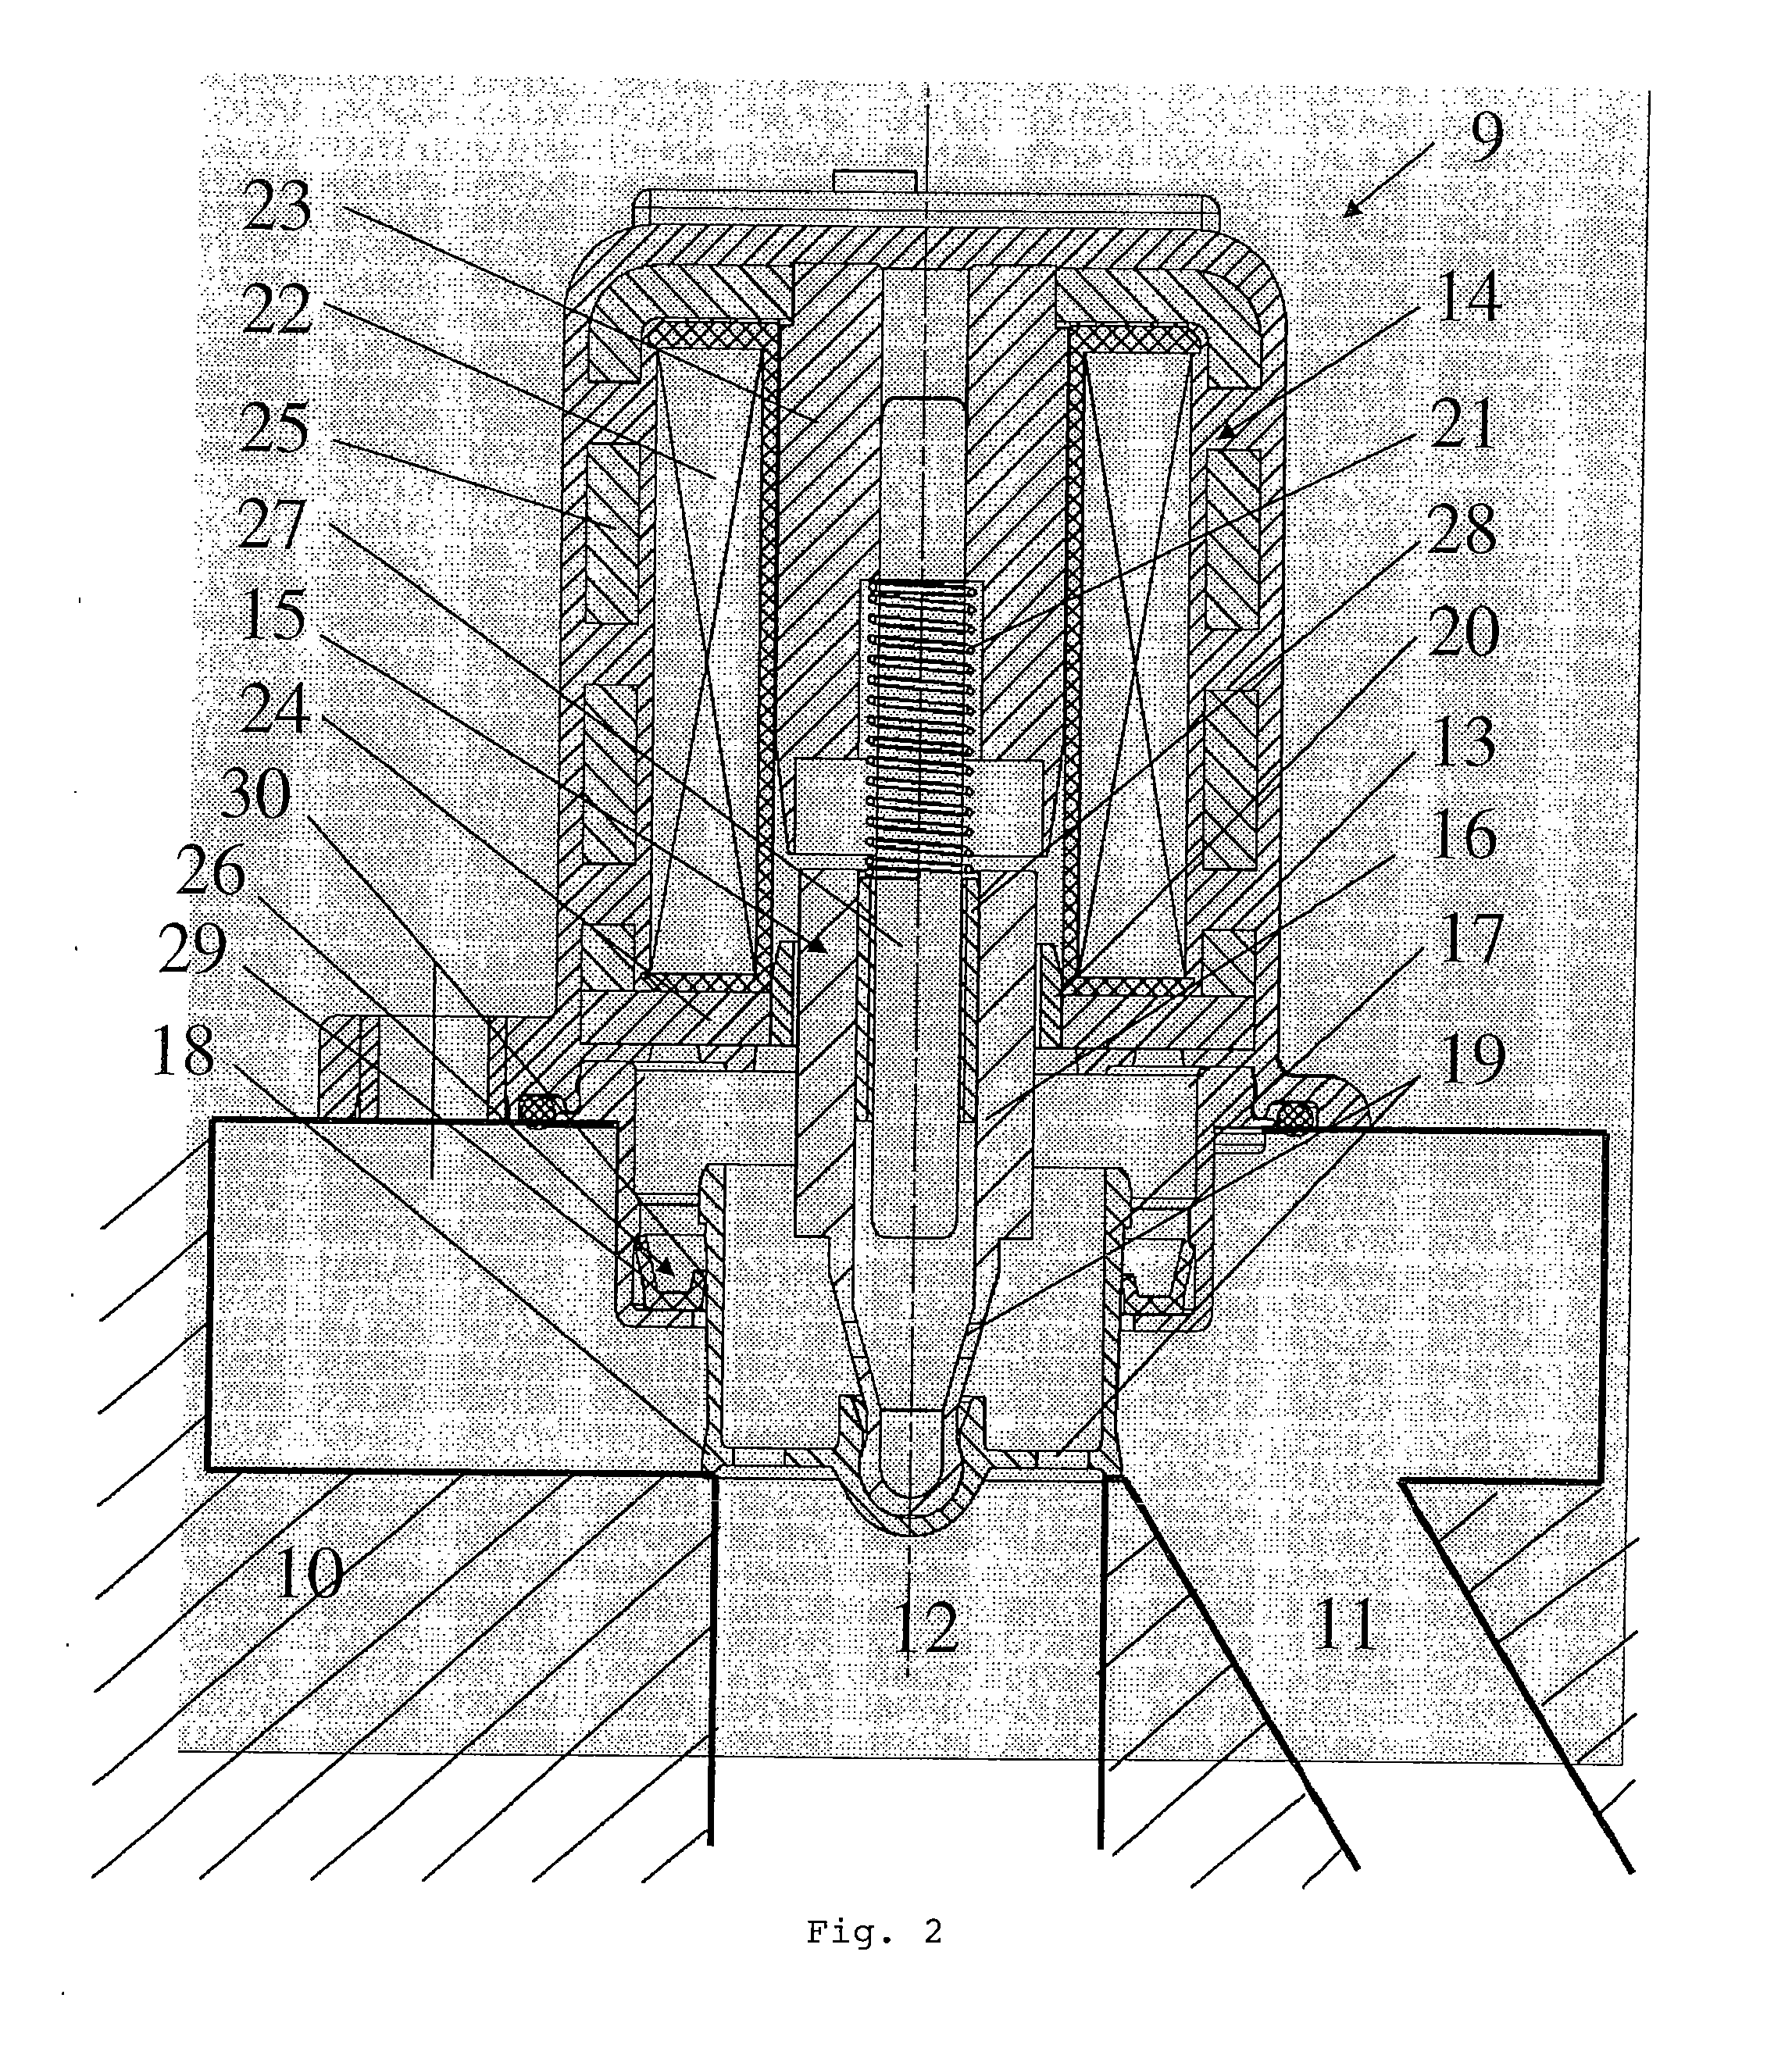 Ambient-air pulsed valve for internal combustion engines equipped with a turbocharger